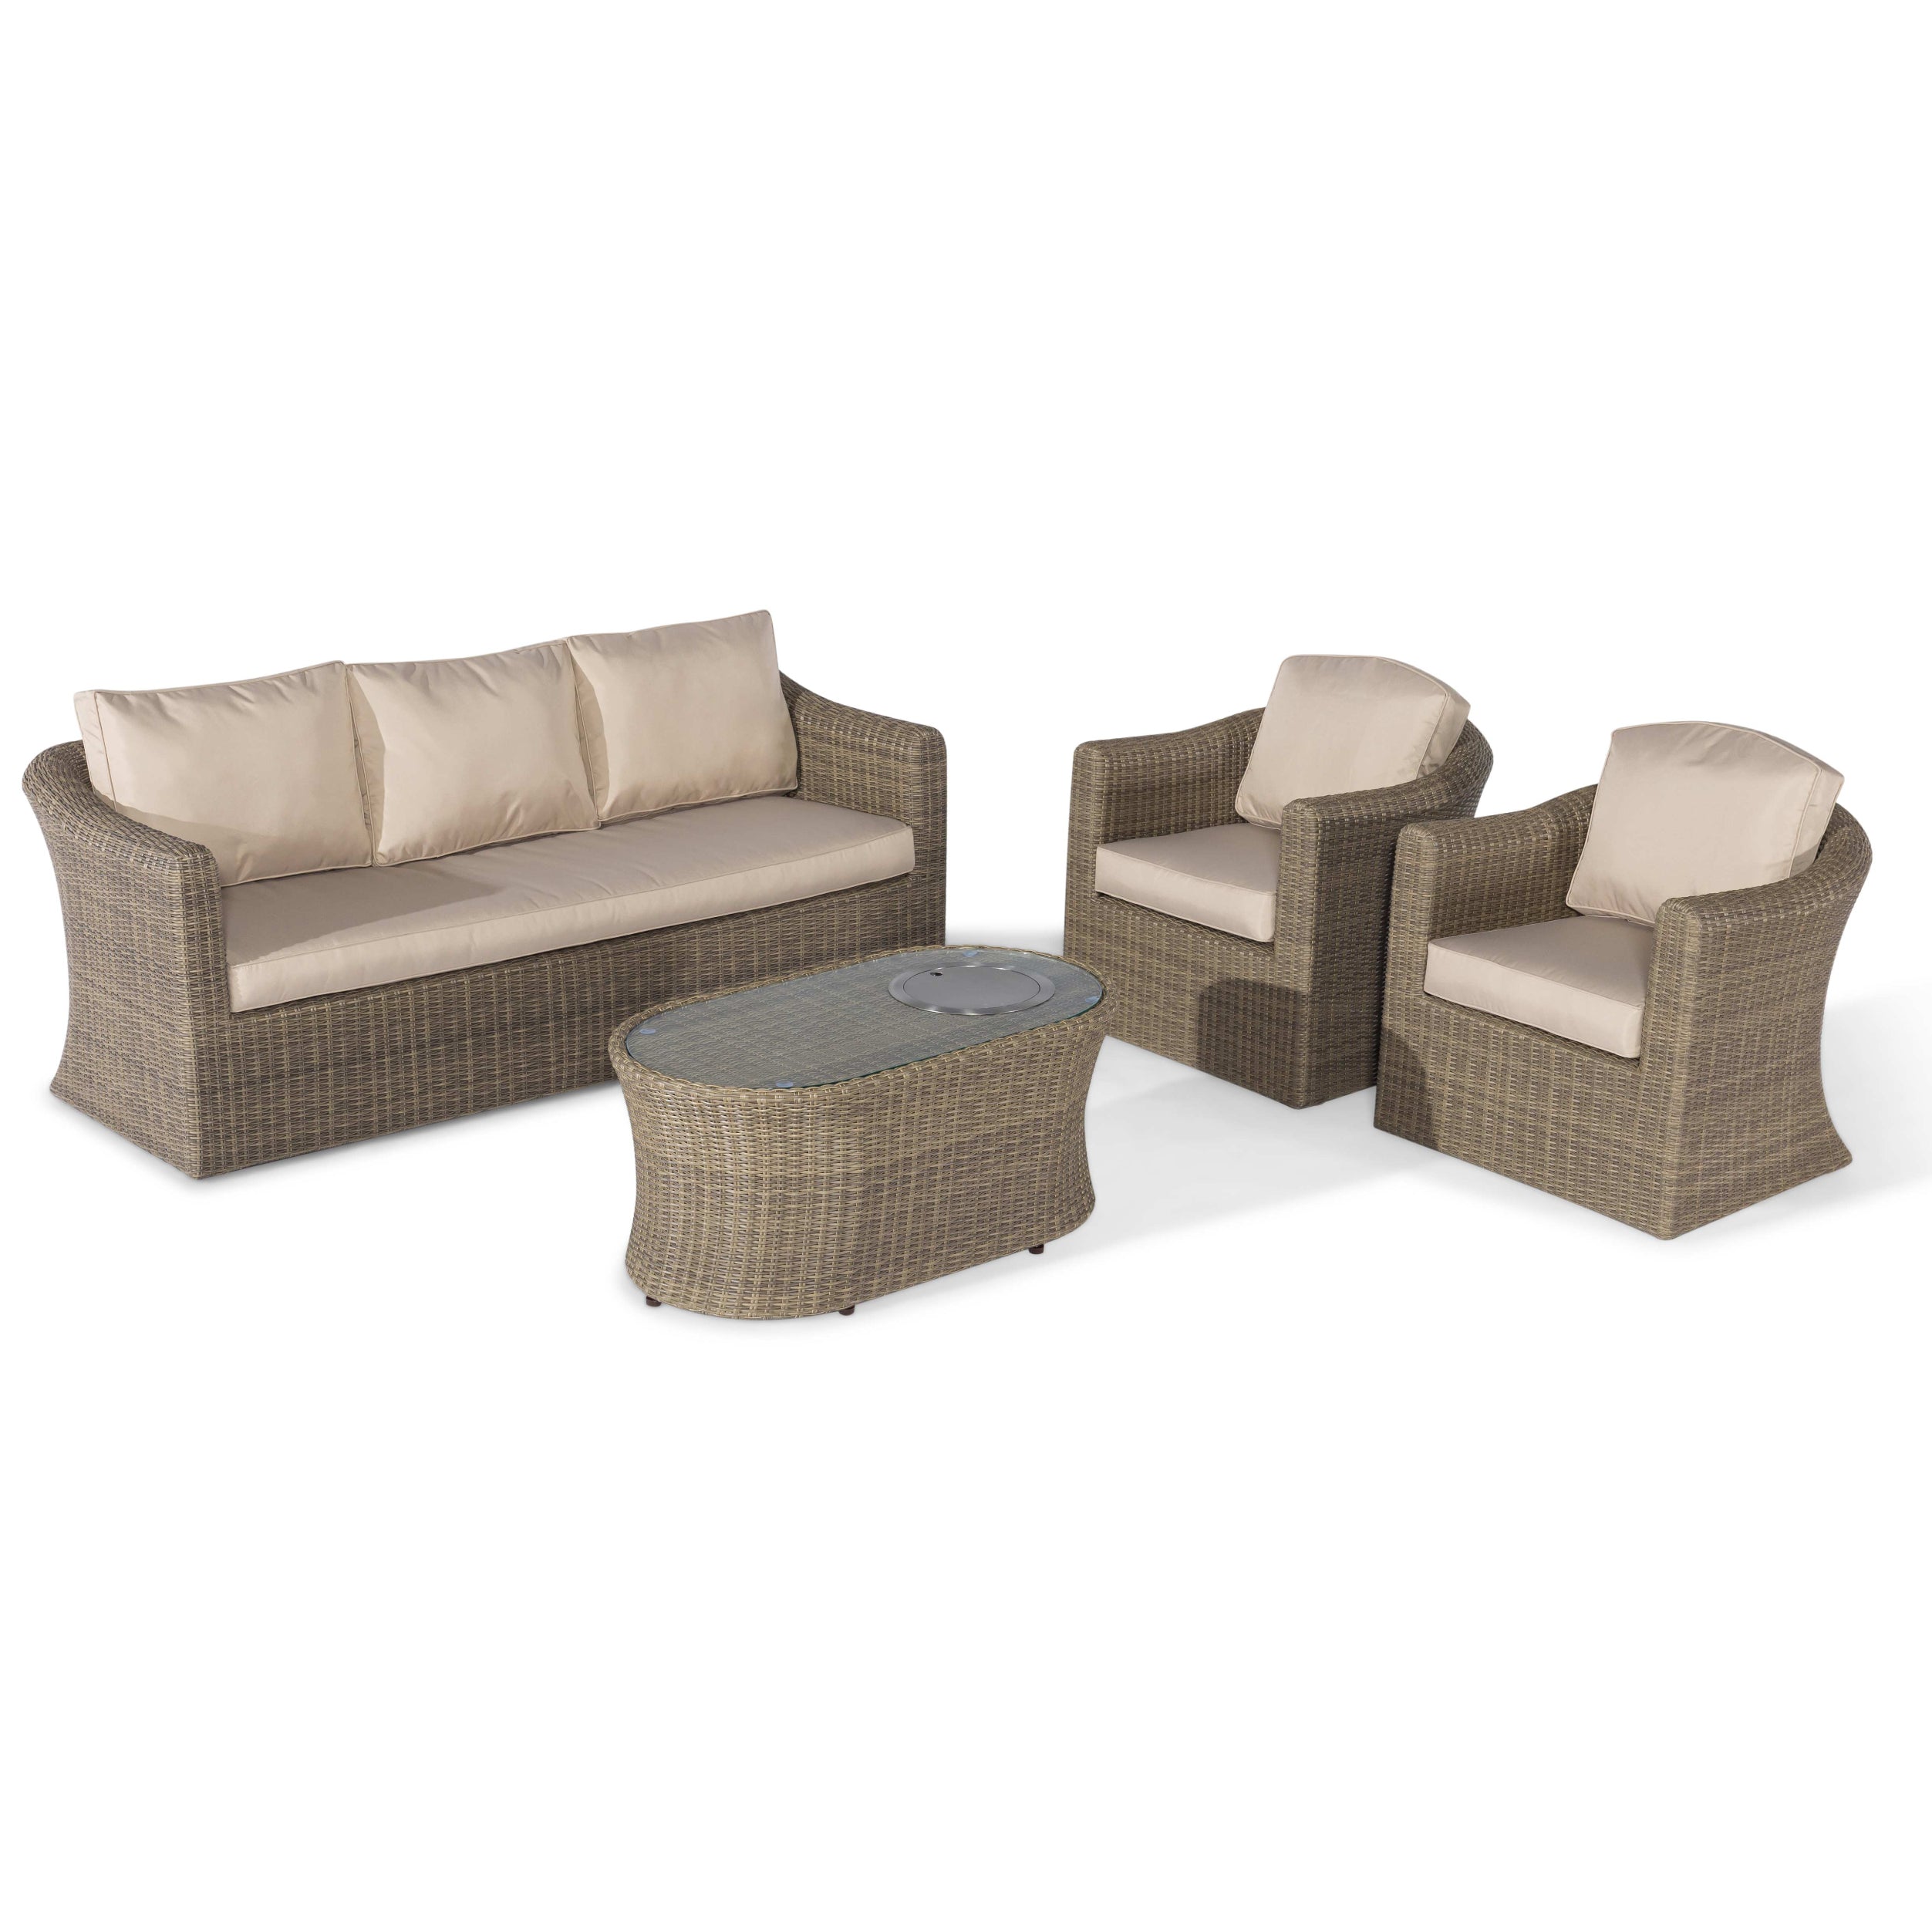 Winchester 3 Seat Sofa Set with Fire Pit